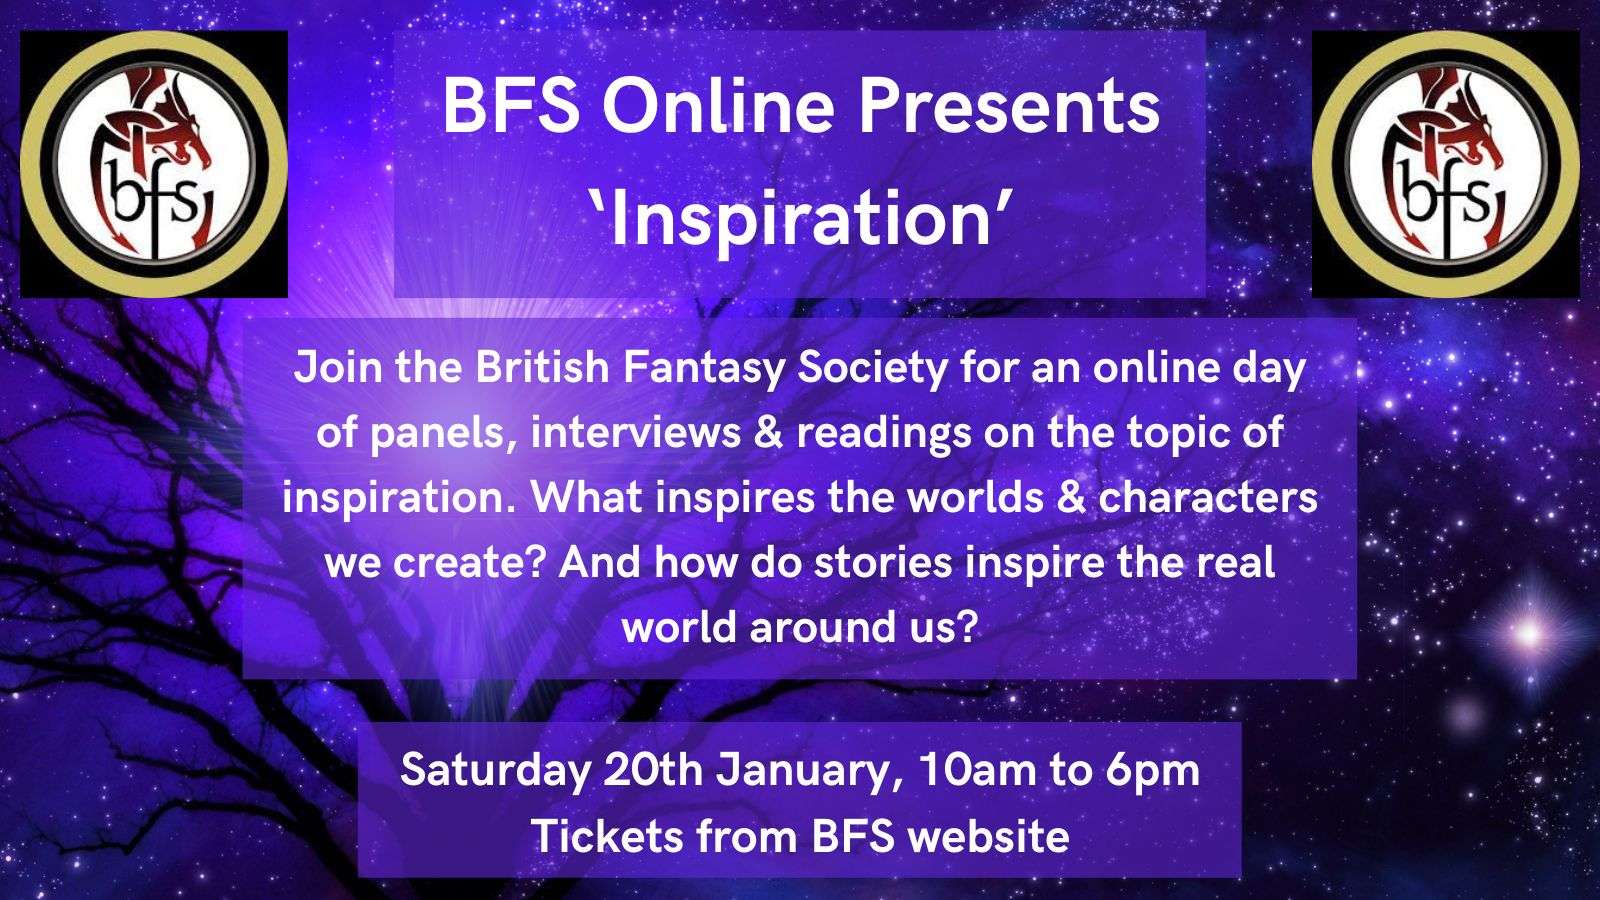 BFS Online Presents ‘Inspiration’ Join the British Fantasy Society for an online day of panels, interviews & readings on the topic of inspiration. What inspires the worlds & characters we create? And how do stories inspire the real world around us? Saturday 20th January, 10am to 6pm Tickets from BFS website